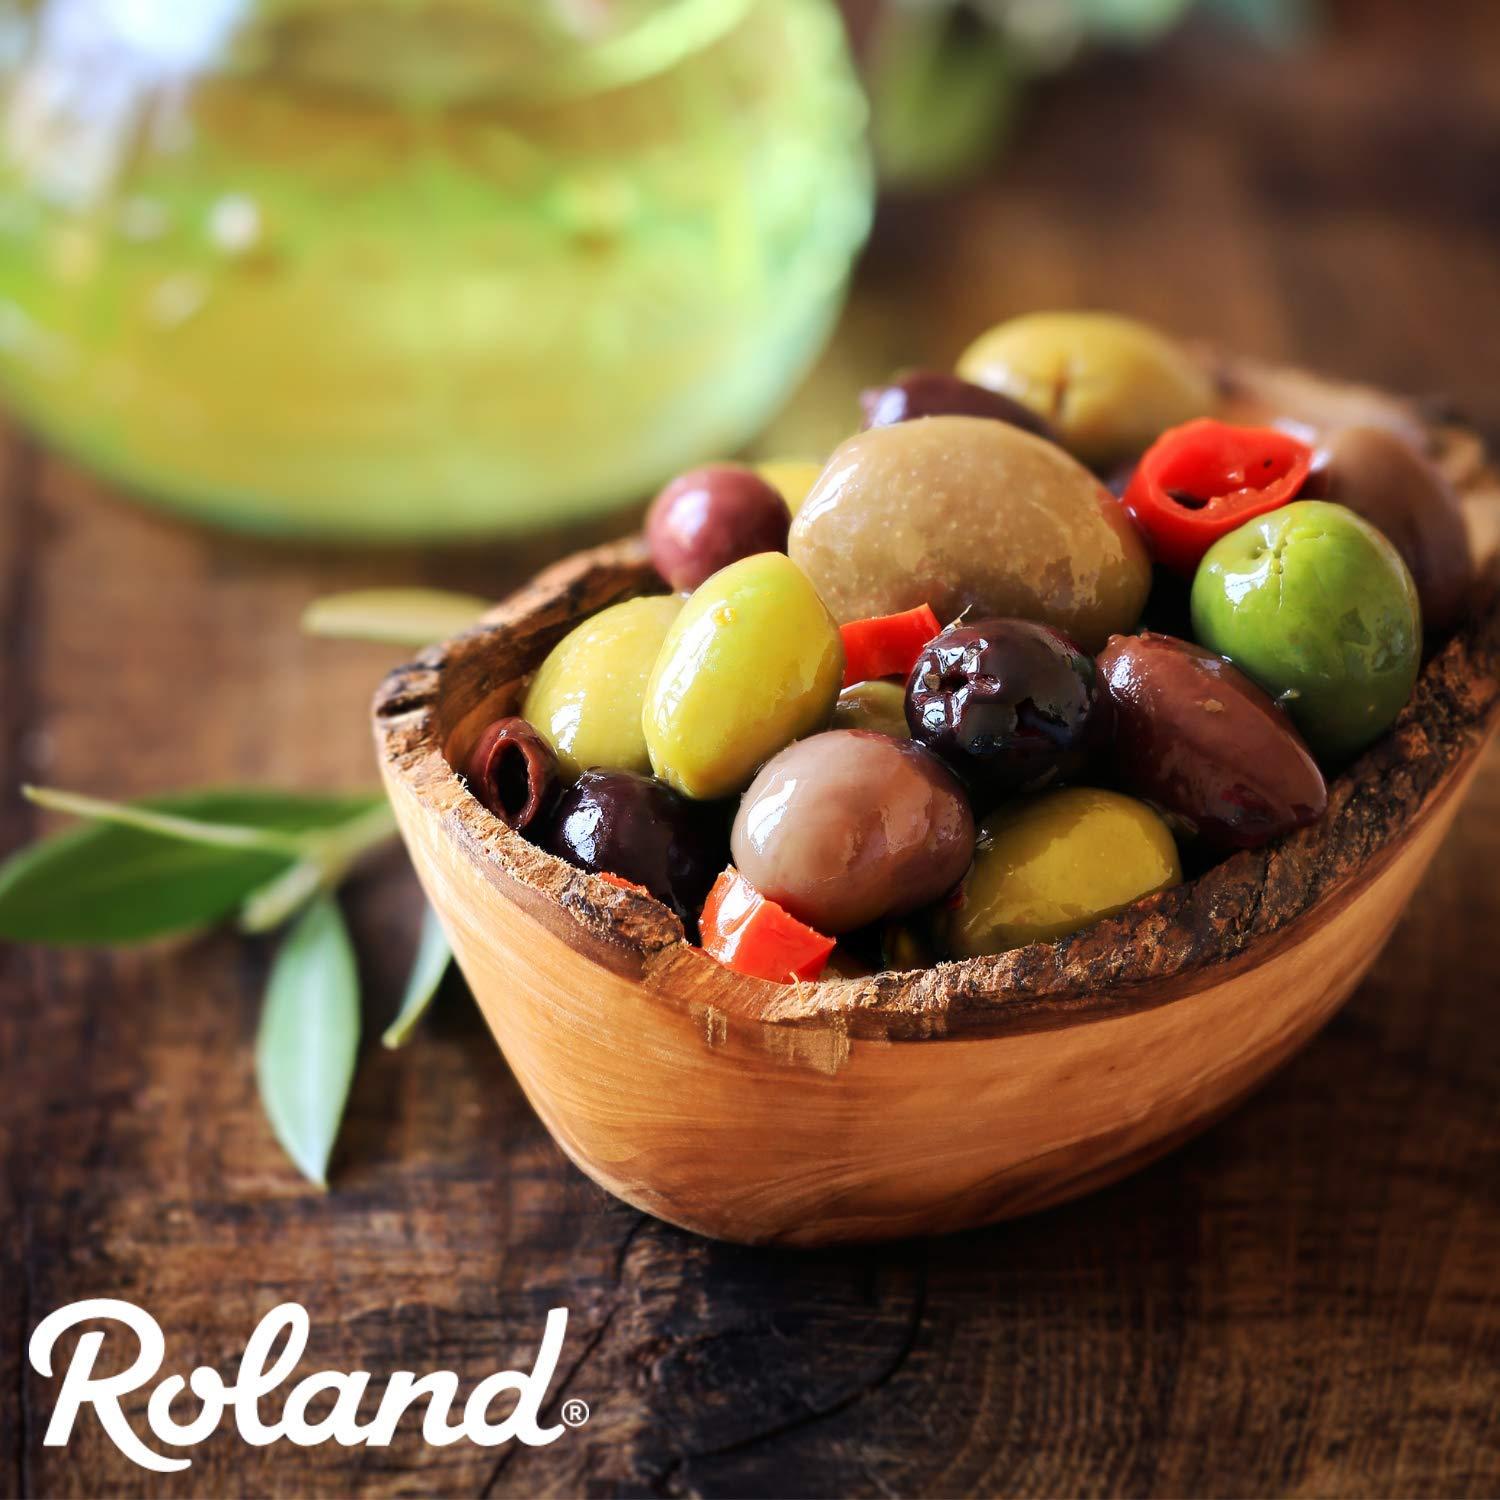 Roland Foods Greek Country Olive Mix, Whole Pitted Olives